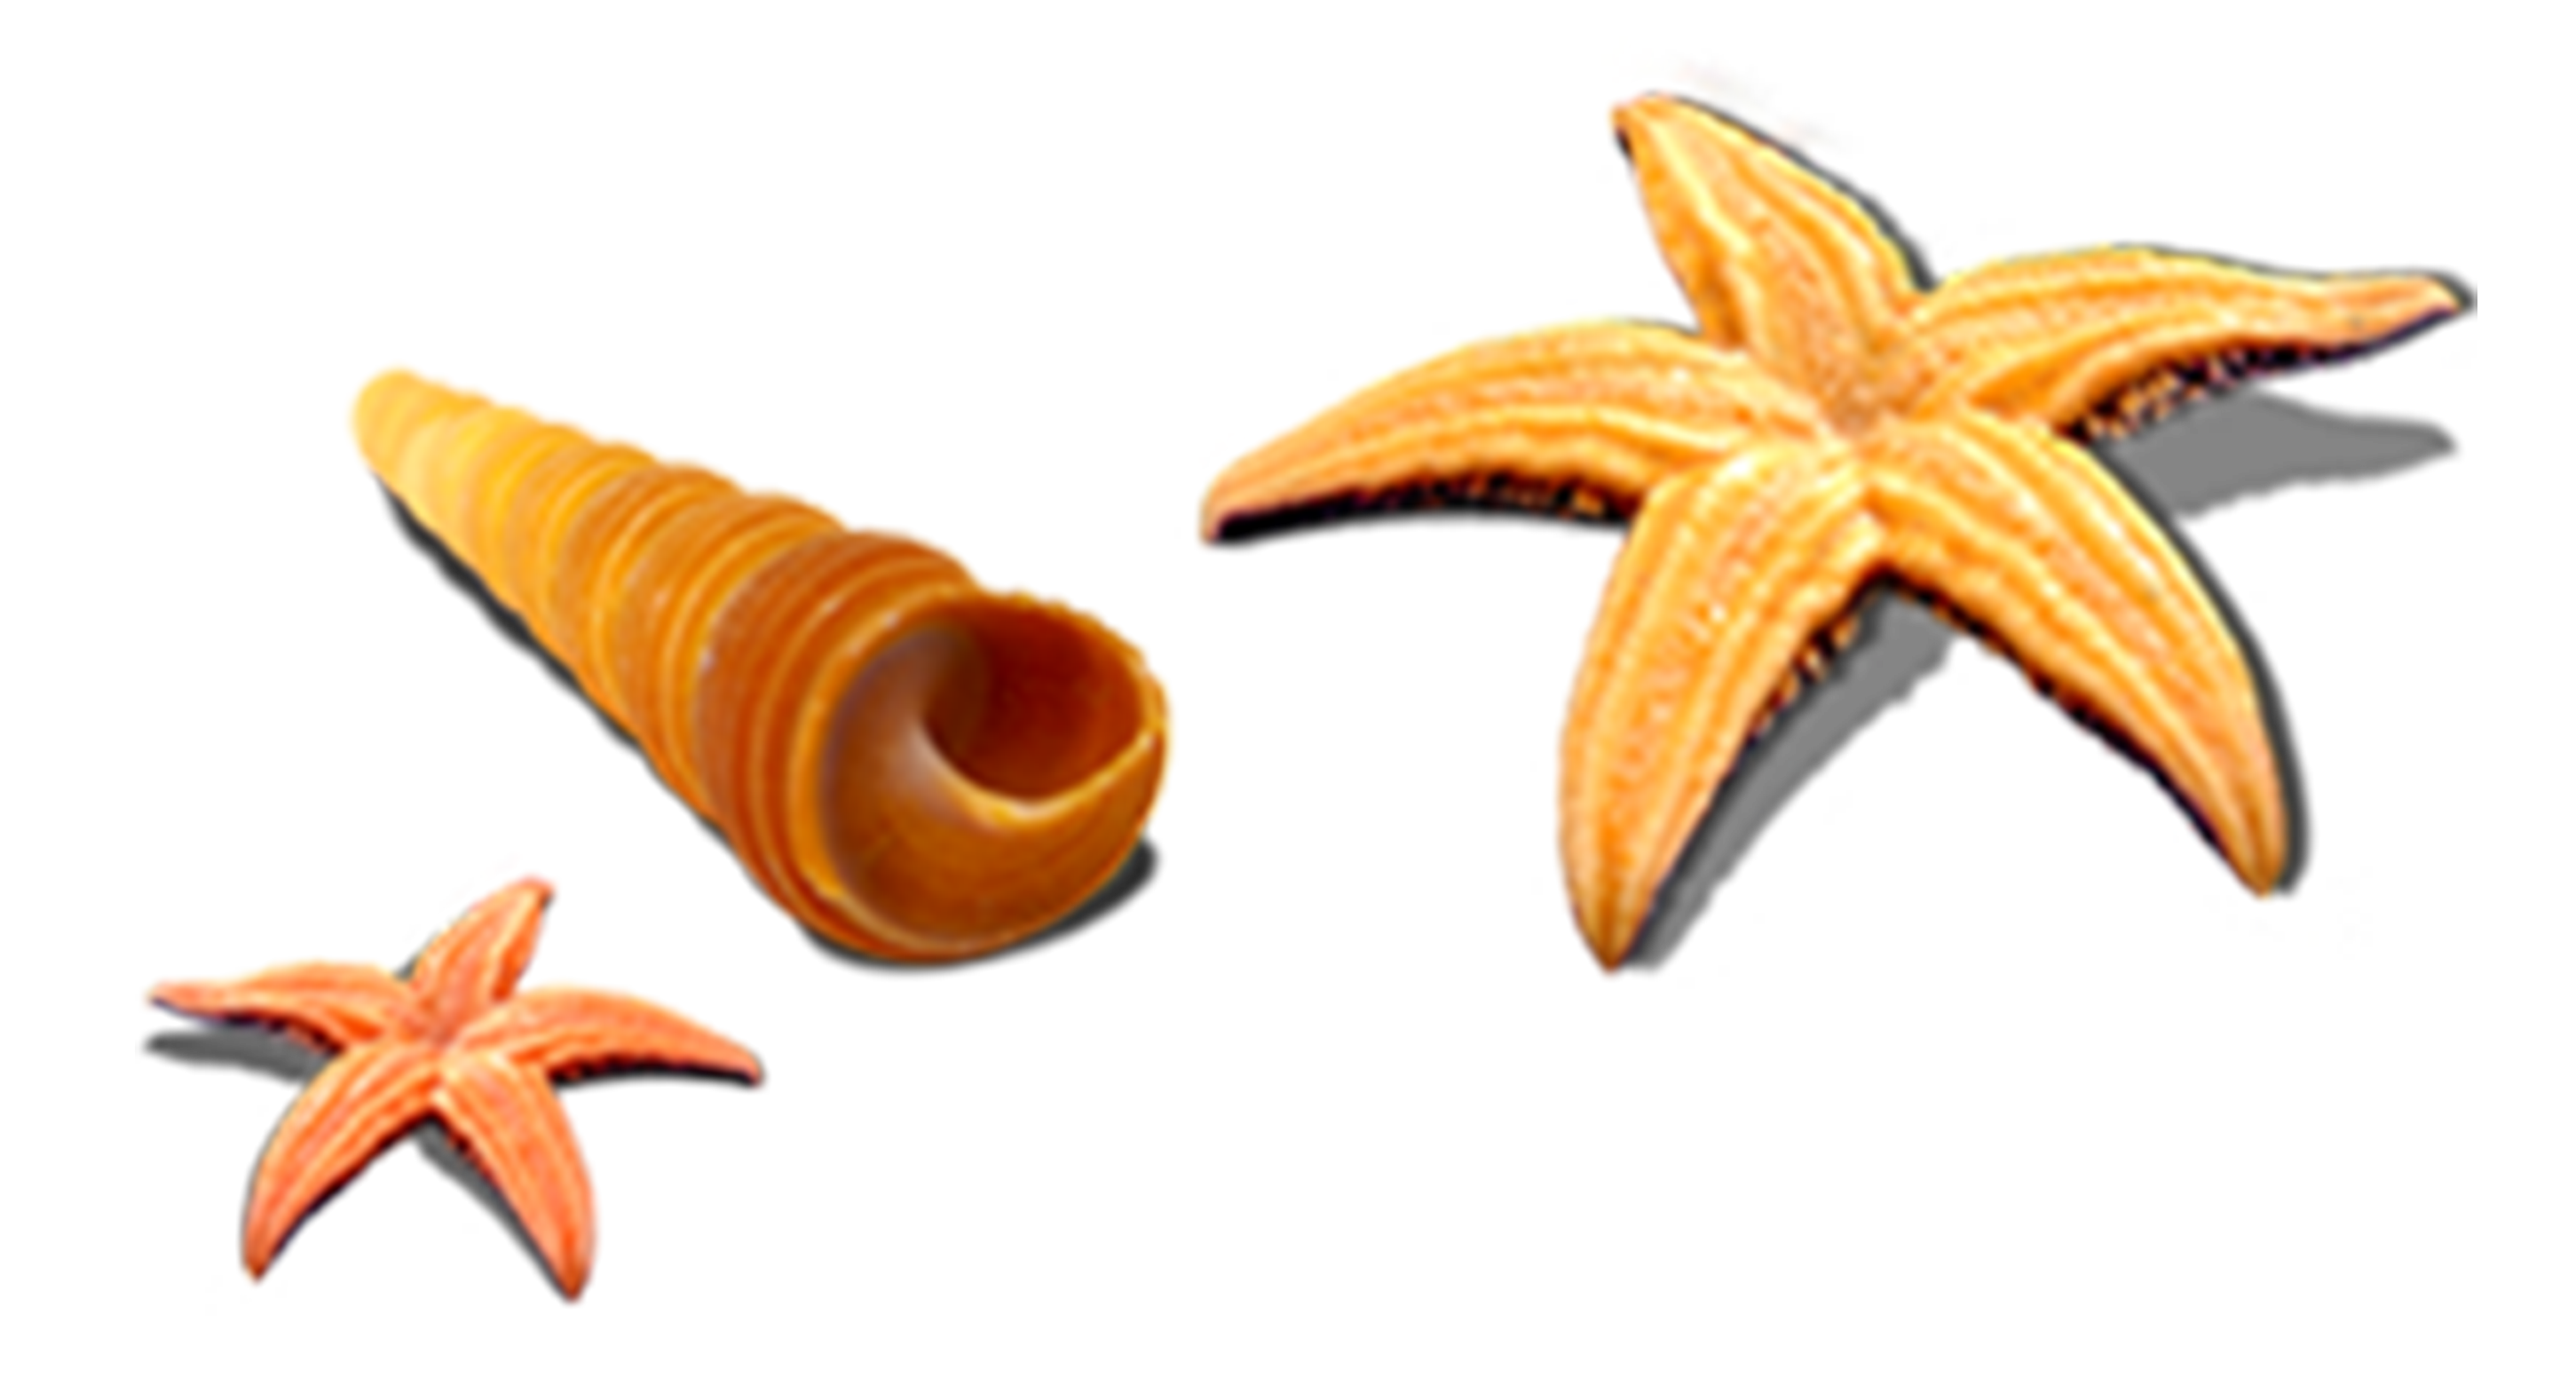 shell clipart sea foods